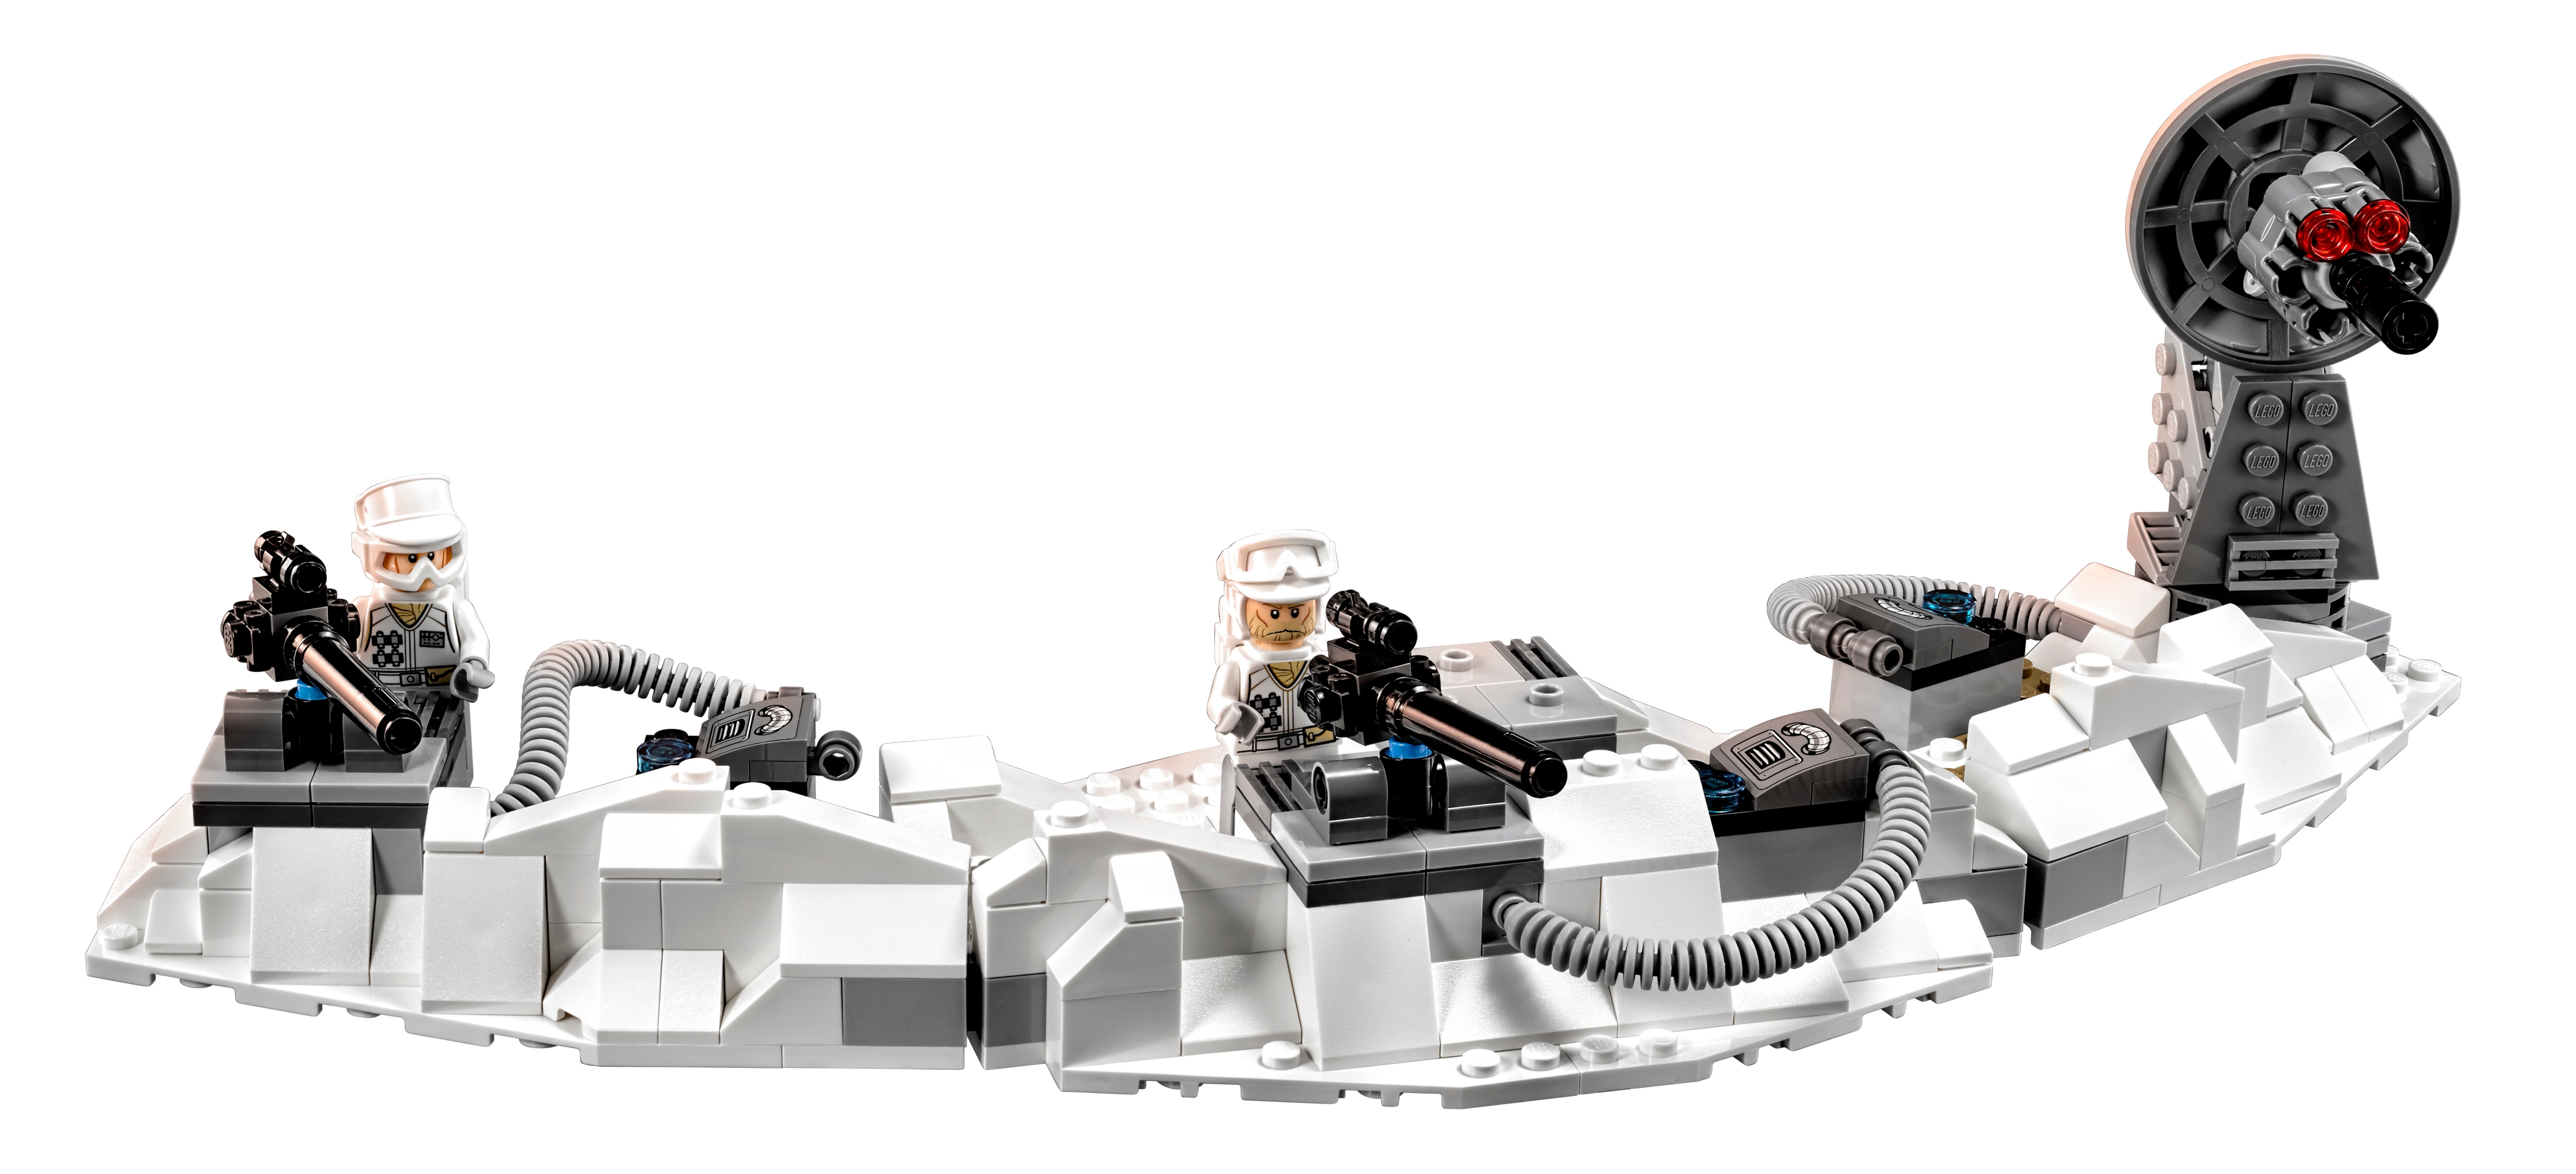 New LEGO Star Wars Han Solo Minifigure from Assault on Hoth 75098 